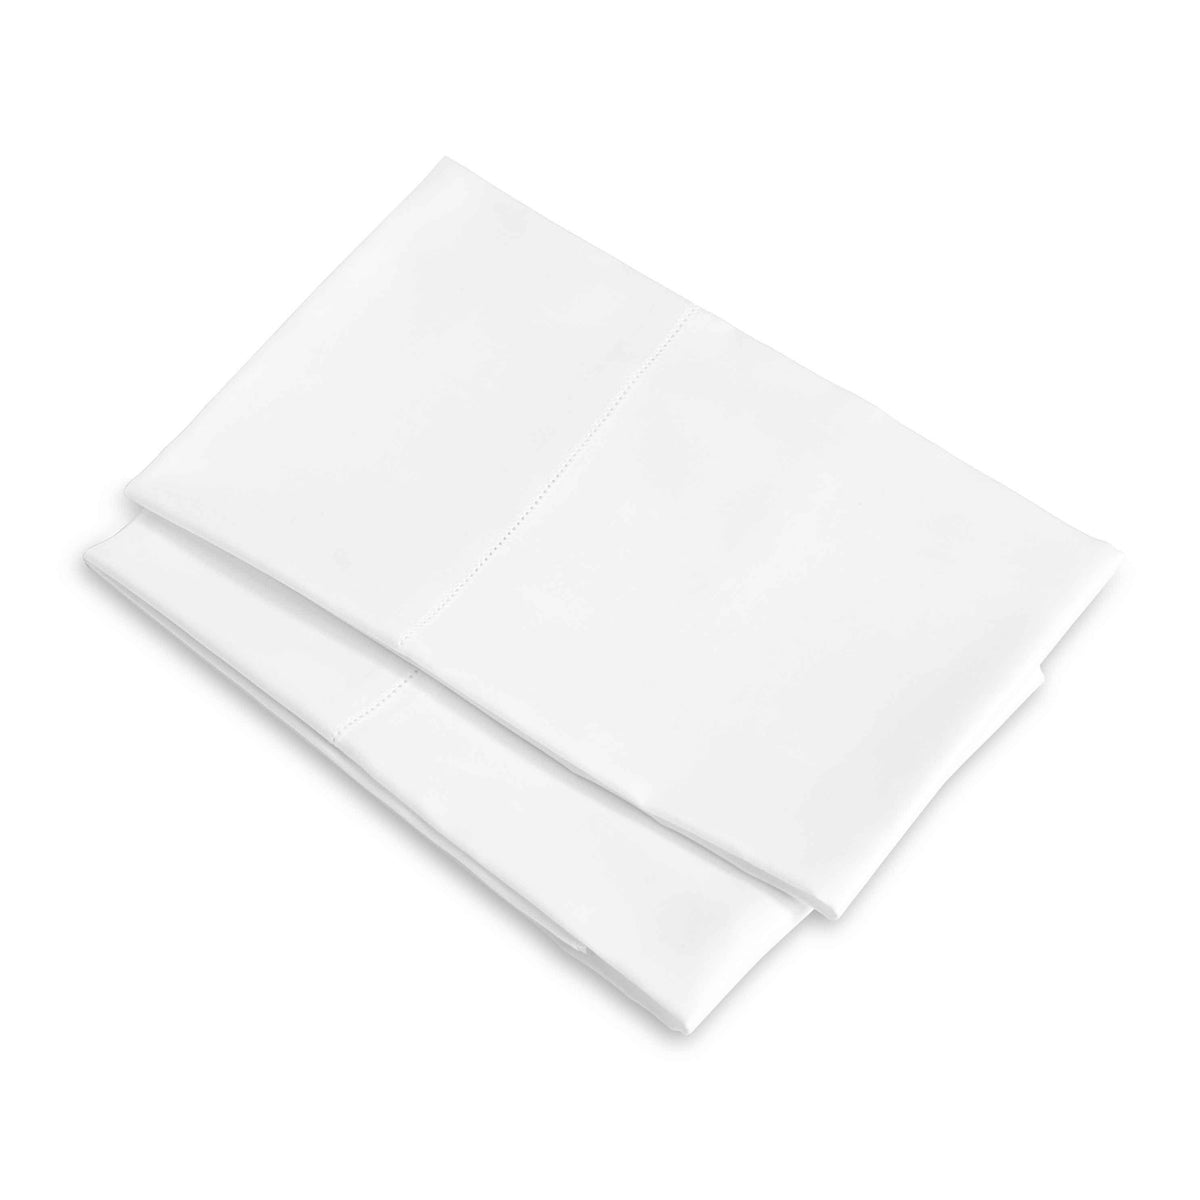 Clear Image of Signoria Tuscan Dreams Pillowcases in White Color